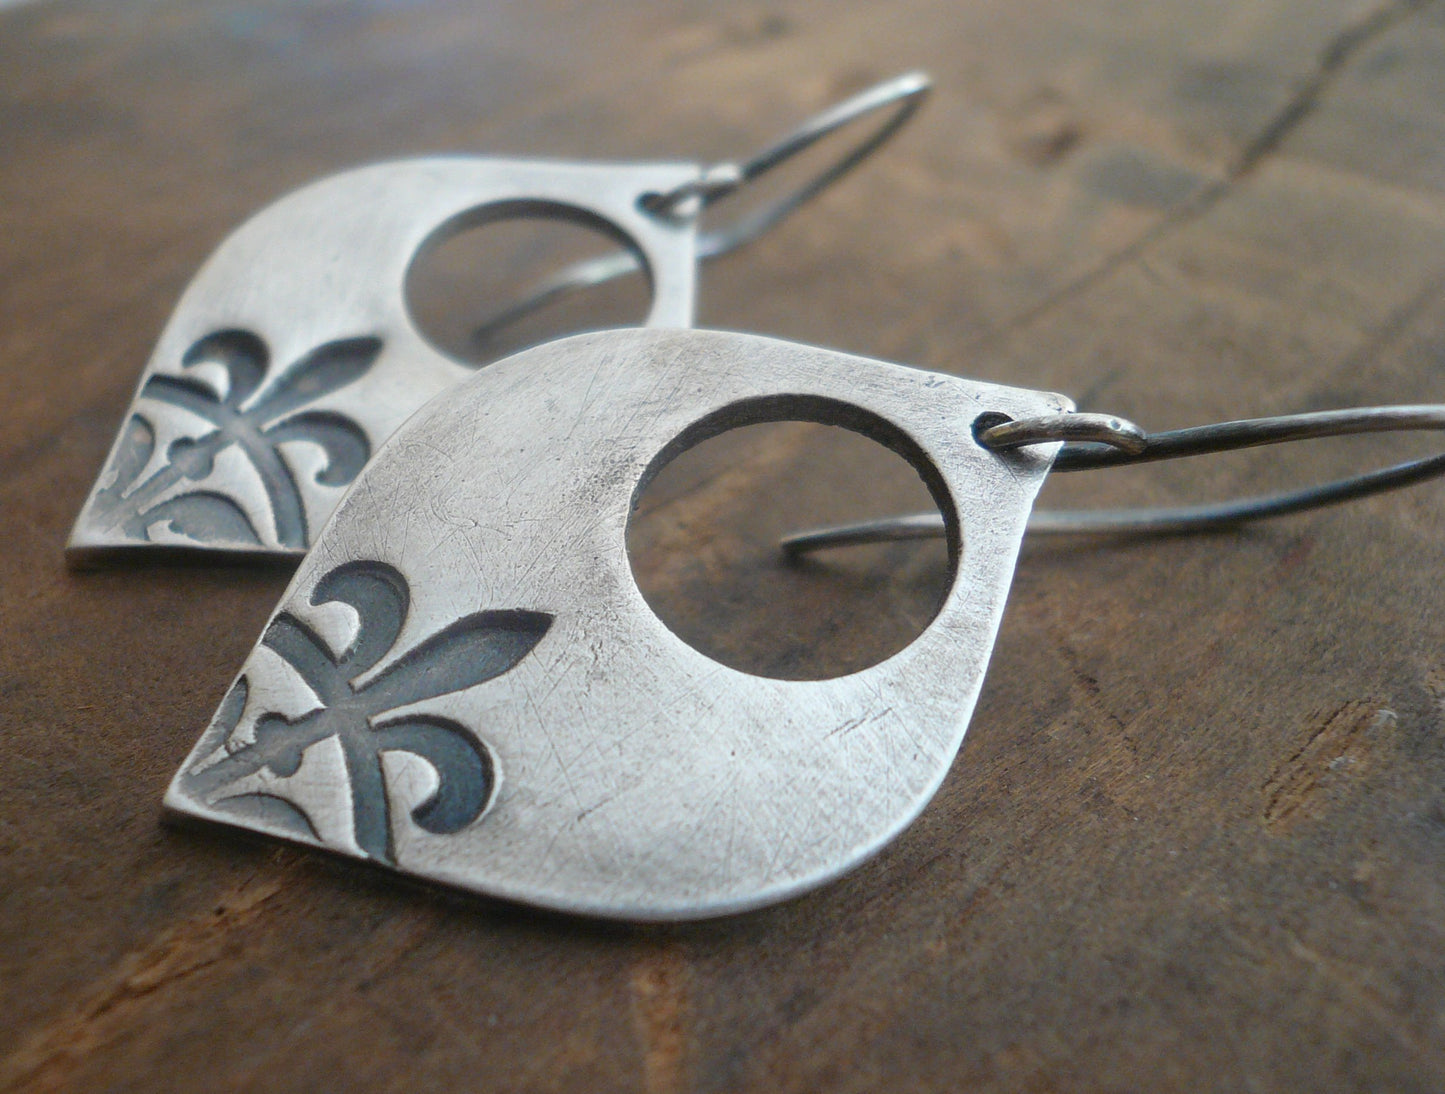 Creole Collection Earrings- Oxidized Sterling and Fine Silver Dangle Earrings. Handmade.